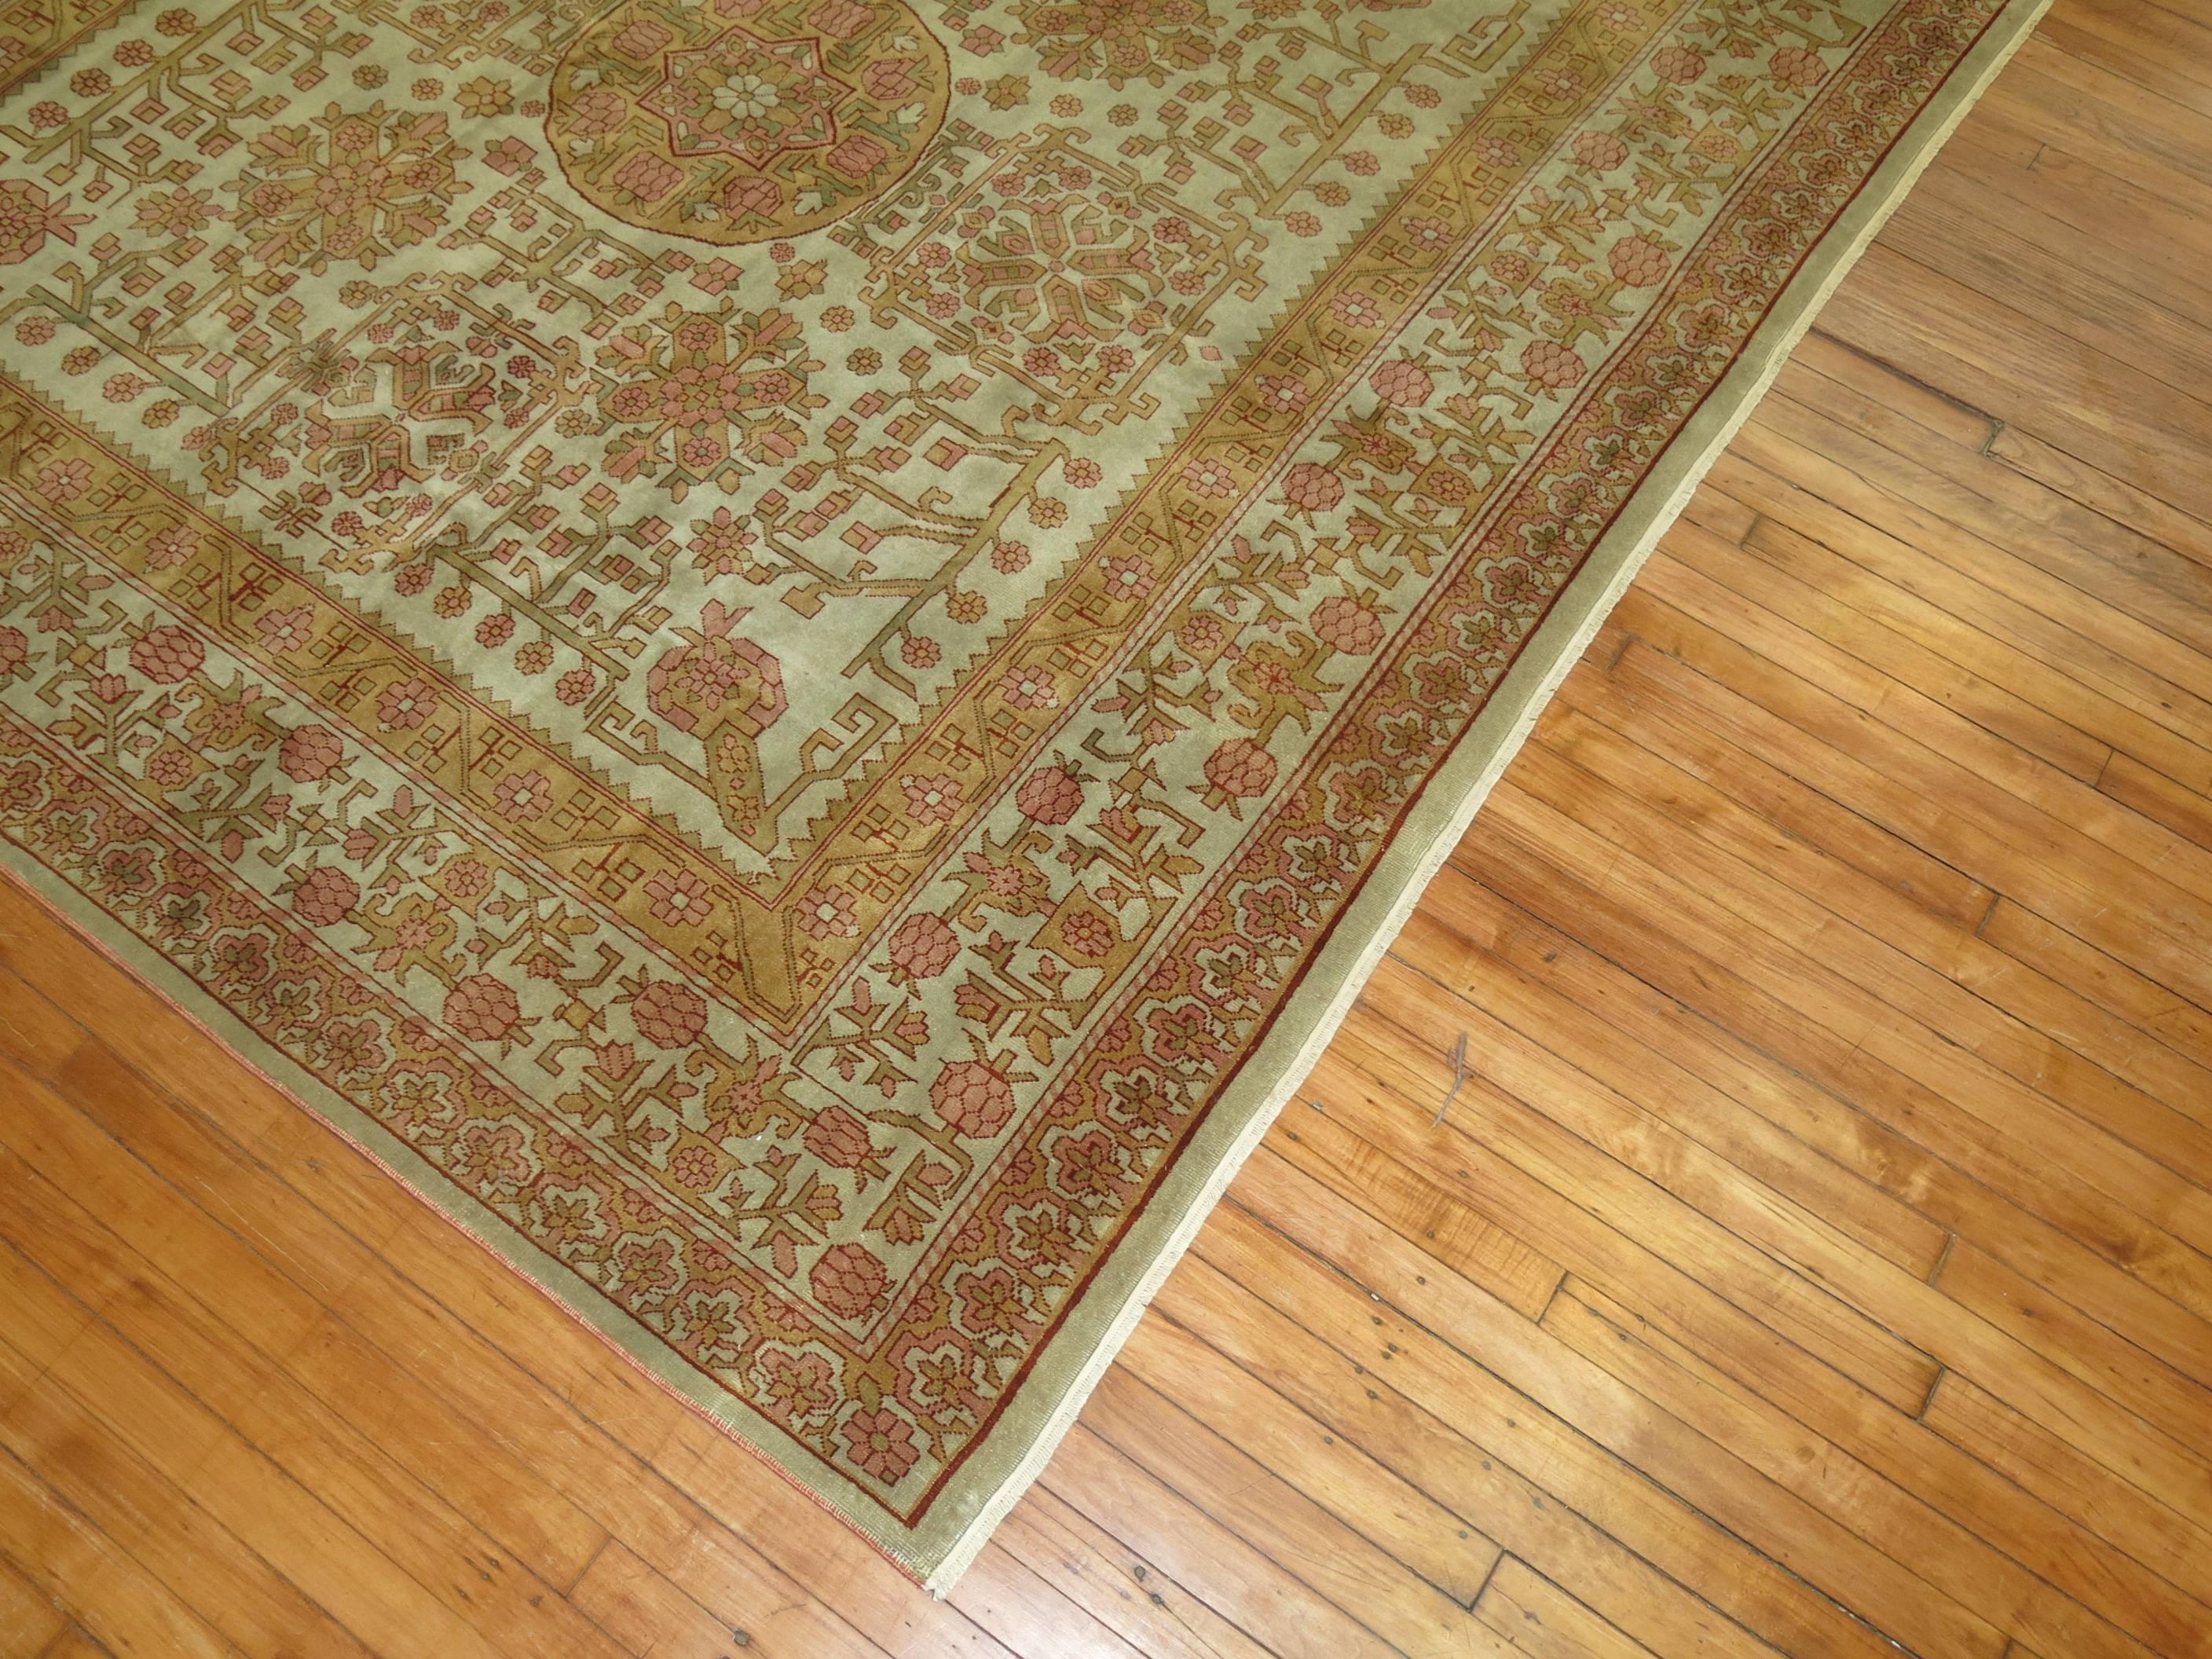 Square Botanical Floral Vintage East Turkestan Rug In Good Condition For Sale In New York, NY